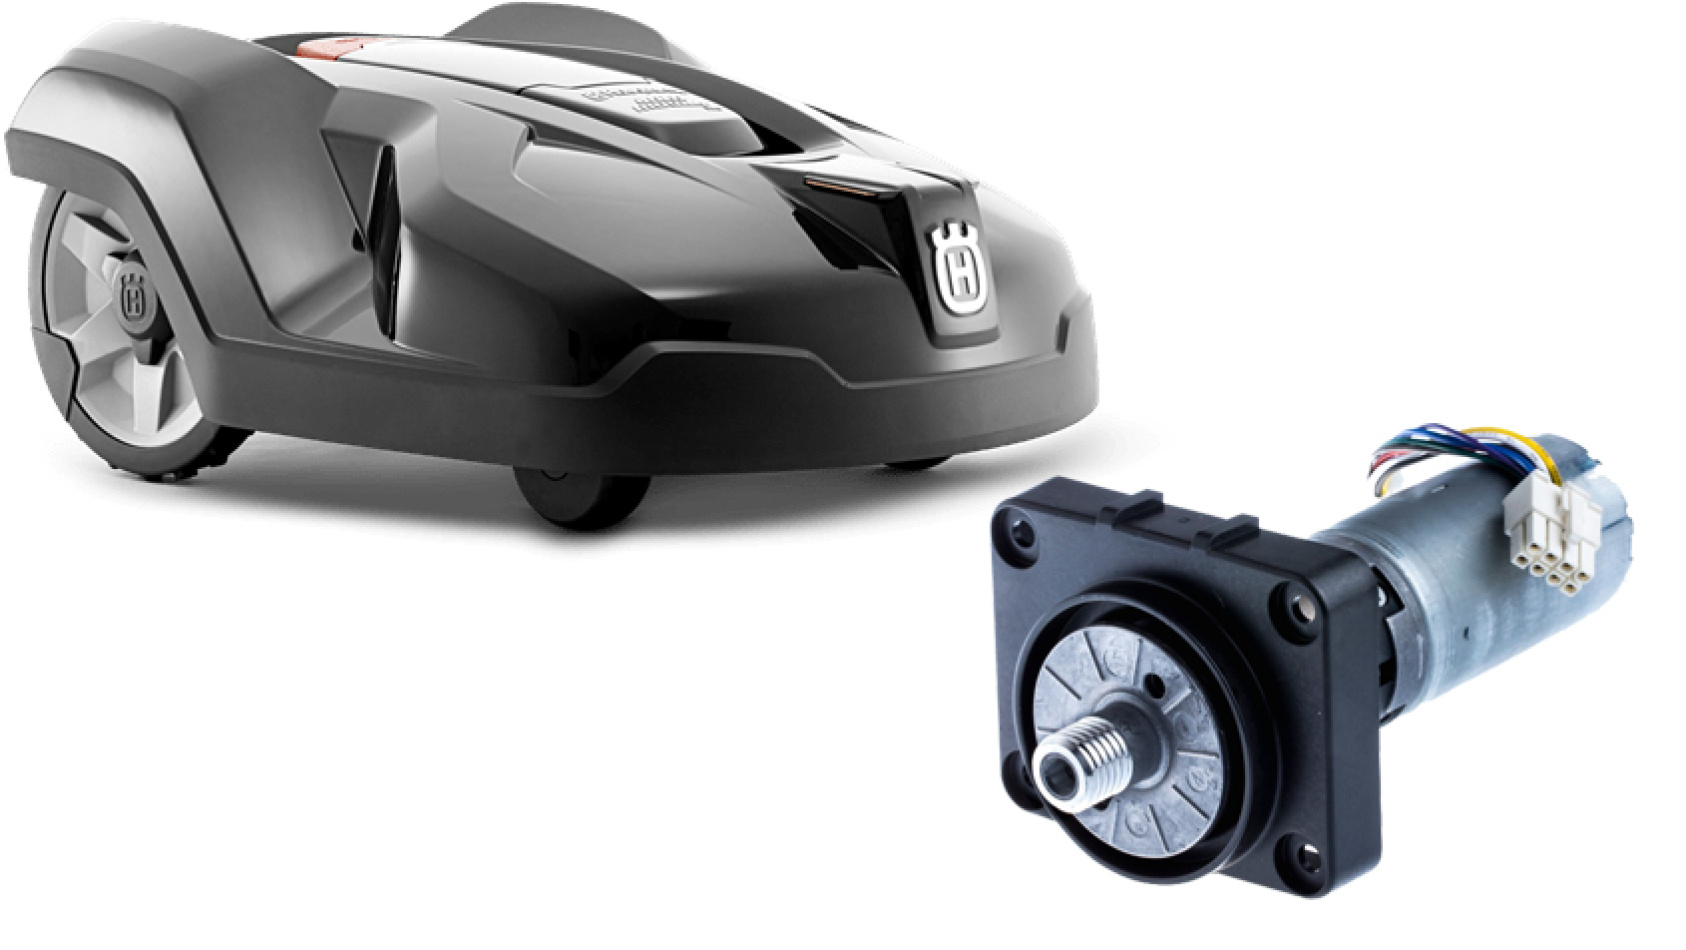 Change the wheel motor on the Husqvarna Automower 320, 330X, 420 and 430X, among other models